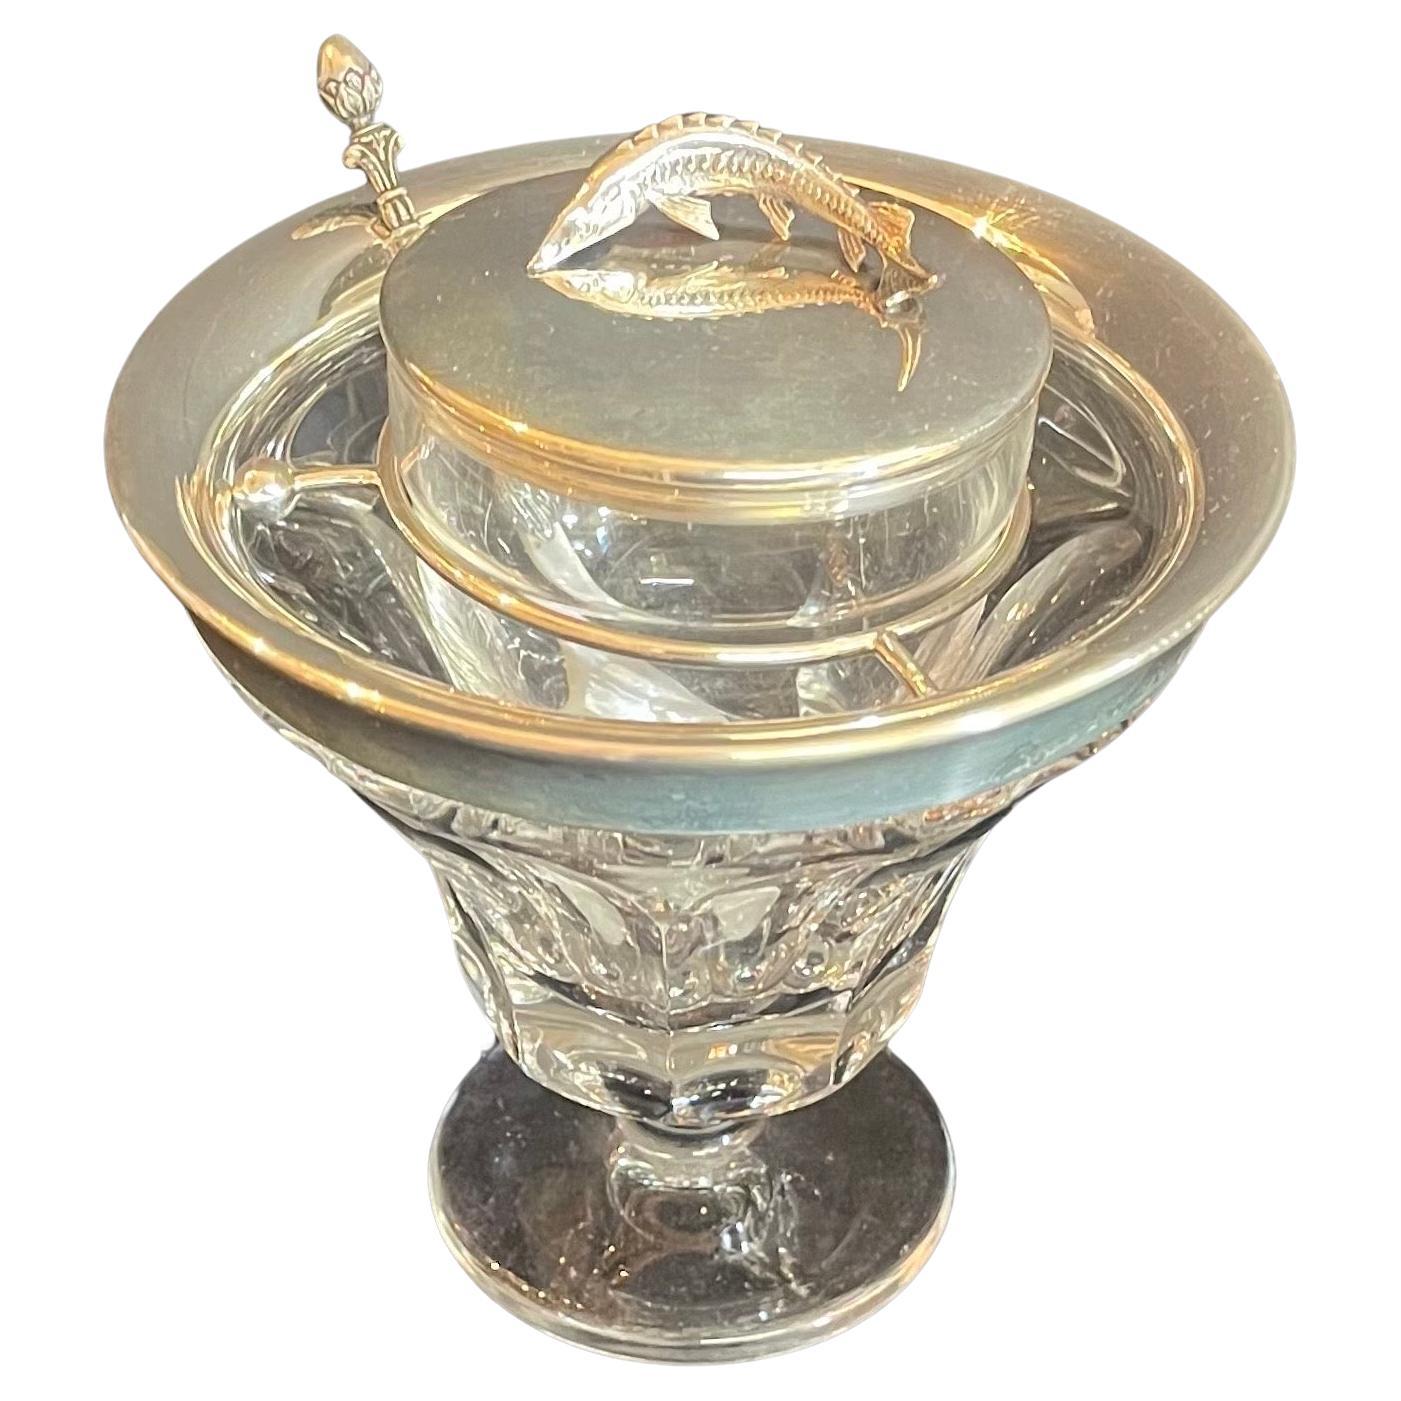 A wonderful entertaining piece by the re known firm of Asprey of London. The finial is of finely chased sterling silver sturgeon beluga. The top rim of the caviar server as well as the glass holder in sterling with a  beautiful clear cut crystal